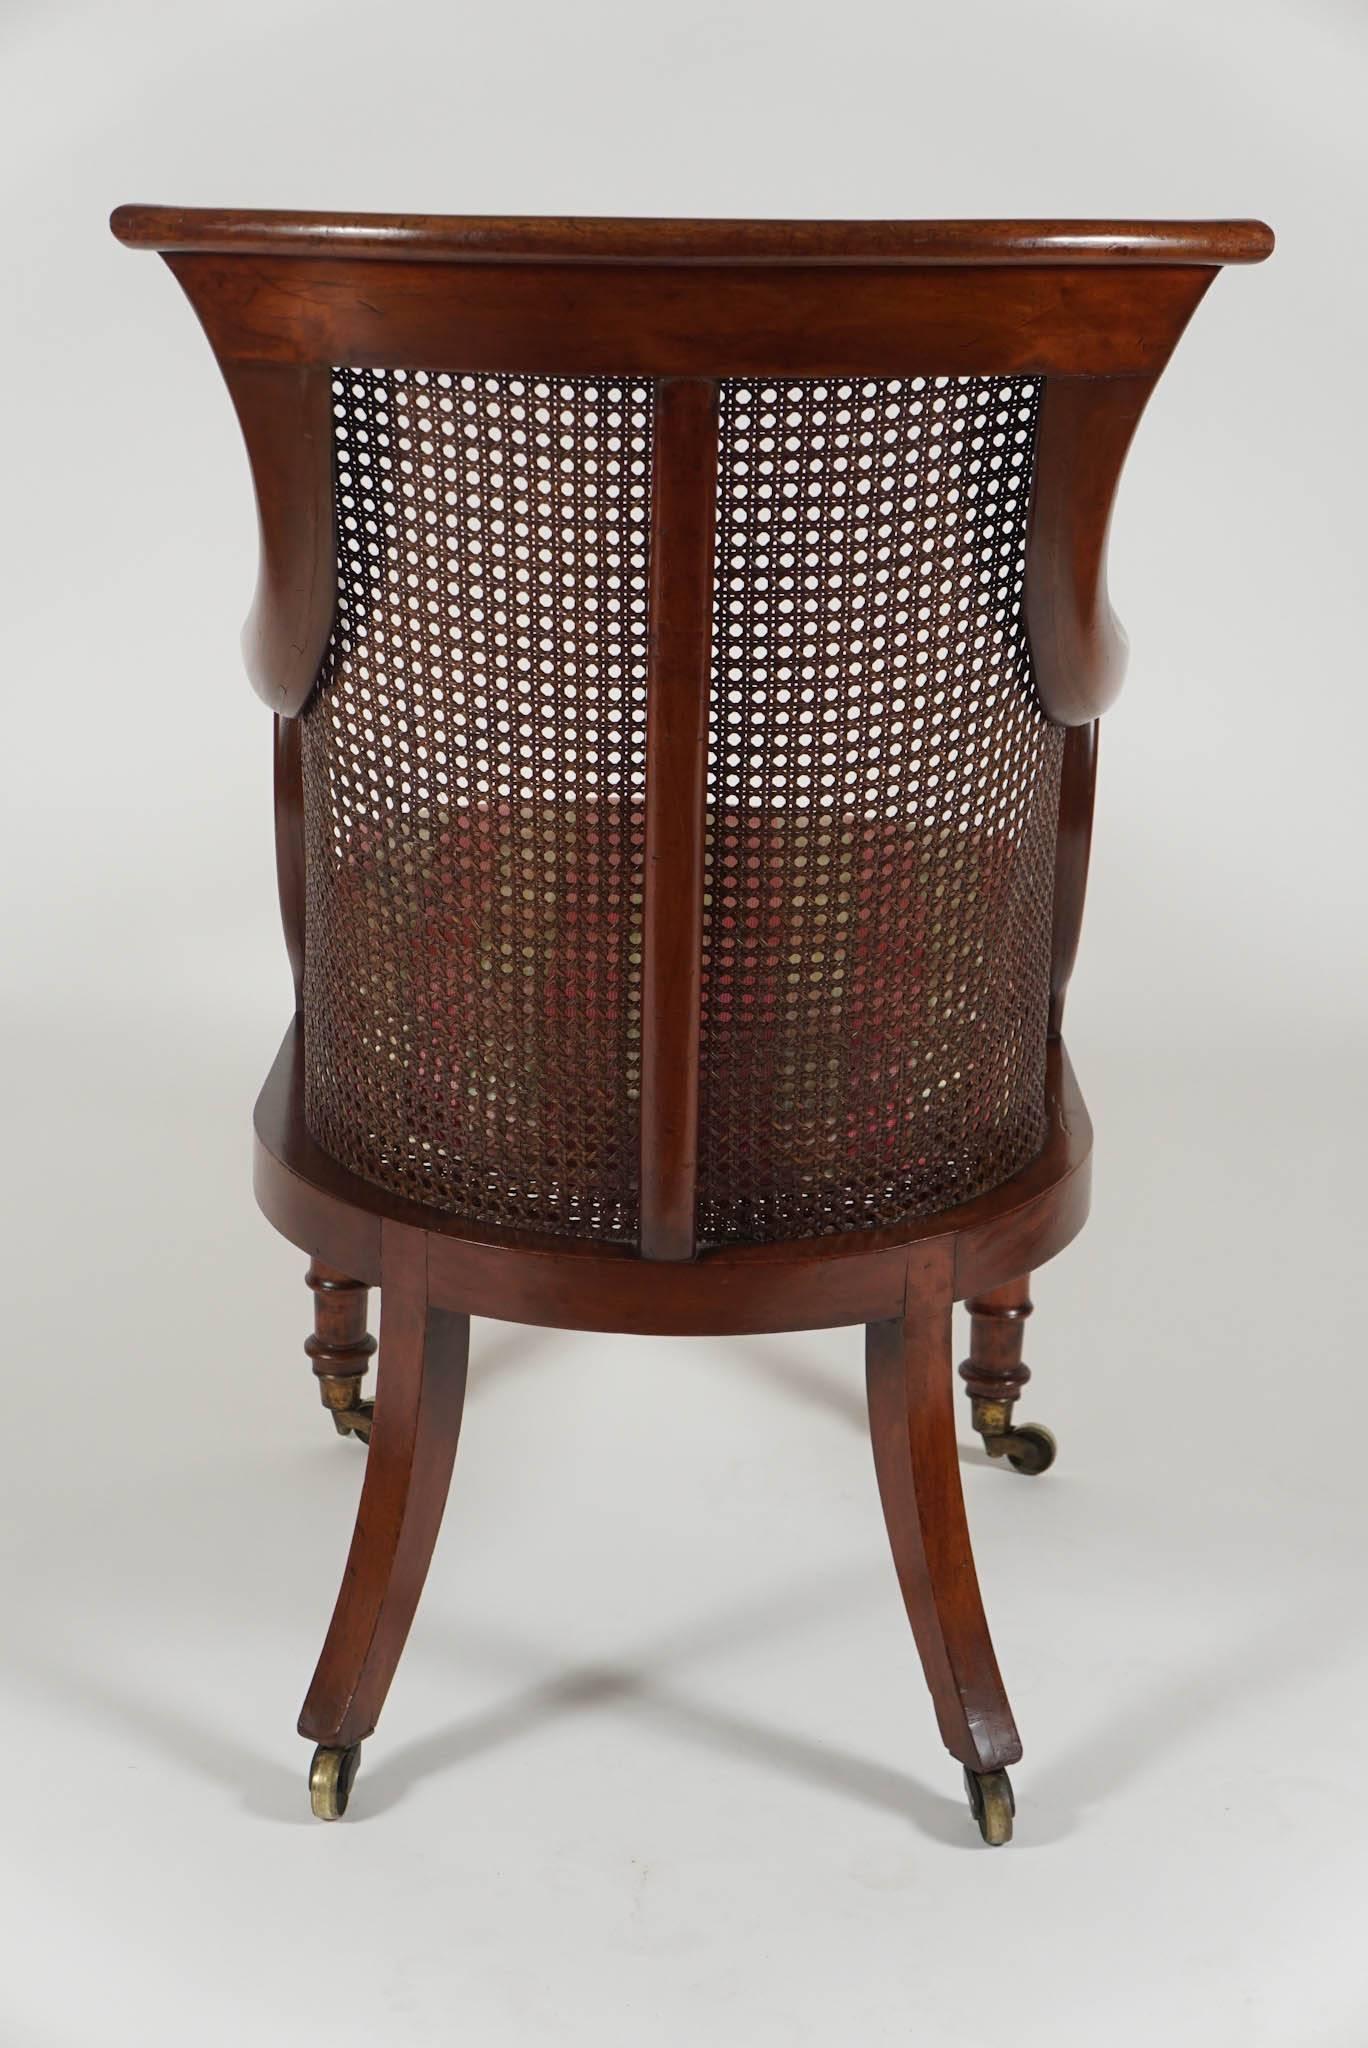 19th Century English Regency Period Caned Mahogany Armchair or Bergere, circa 1830